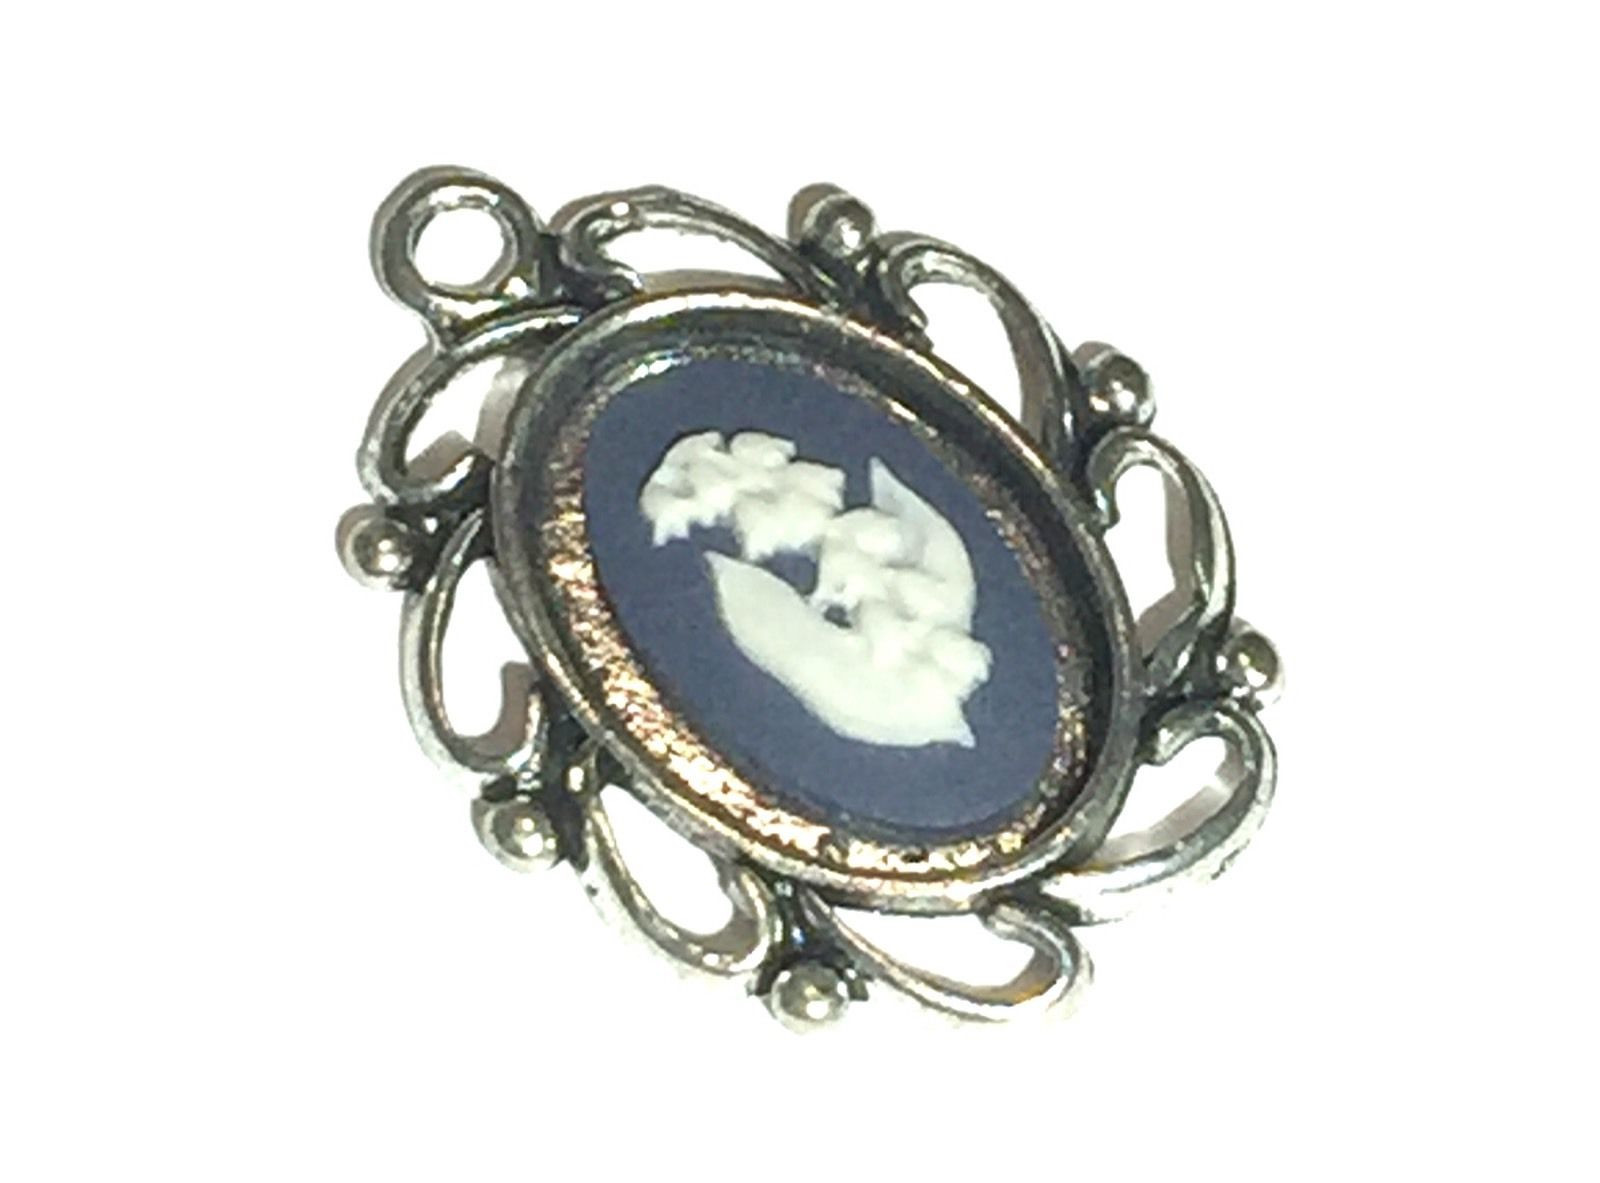 26 Best Wedgwood Portland Vase 2022 free download wedgwood portland vase of authentic wedgwood jasperware cameo in silver plated pendant with authentic wedgwood jasperware cameo in silver plated pendant